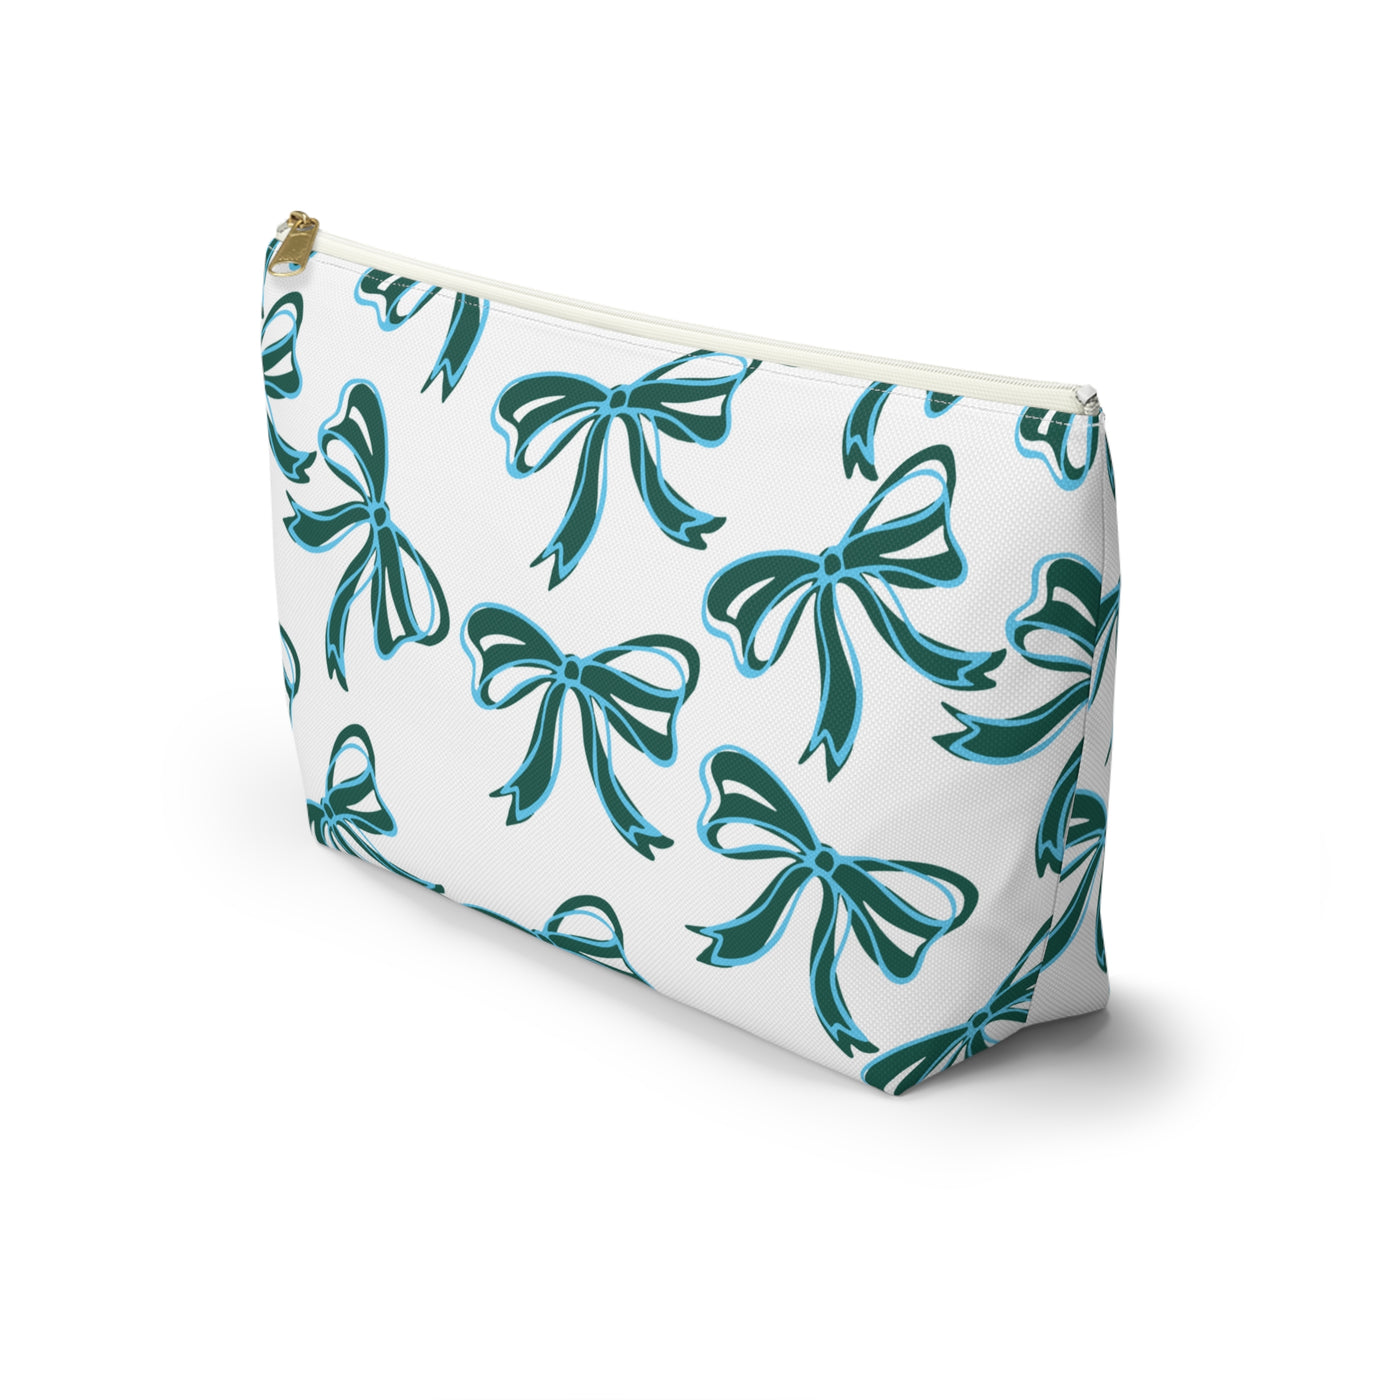 Trendy Bow Makeup Bag - Graduation Gift, Bed Party Gift, Acceptance Gift, College Gift, Tulane, Blue and Green